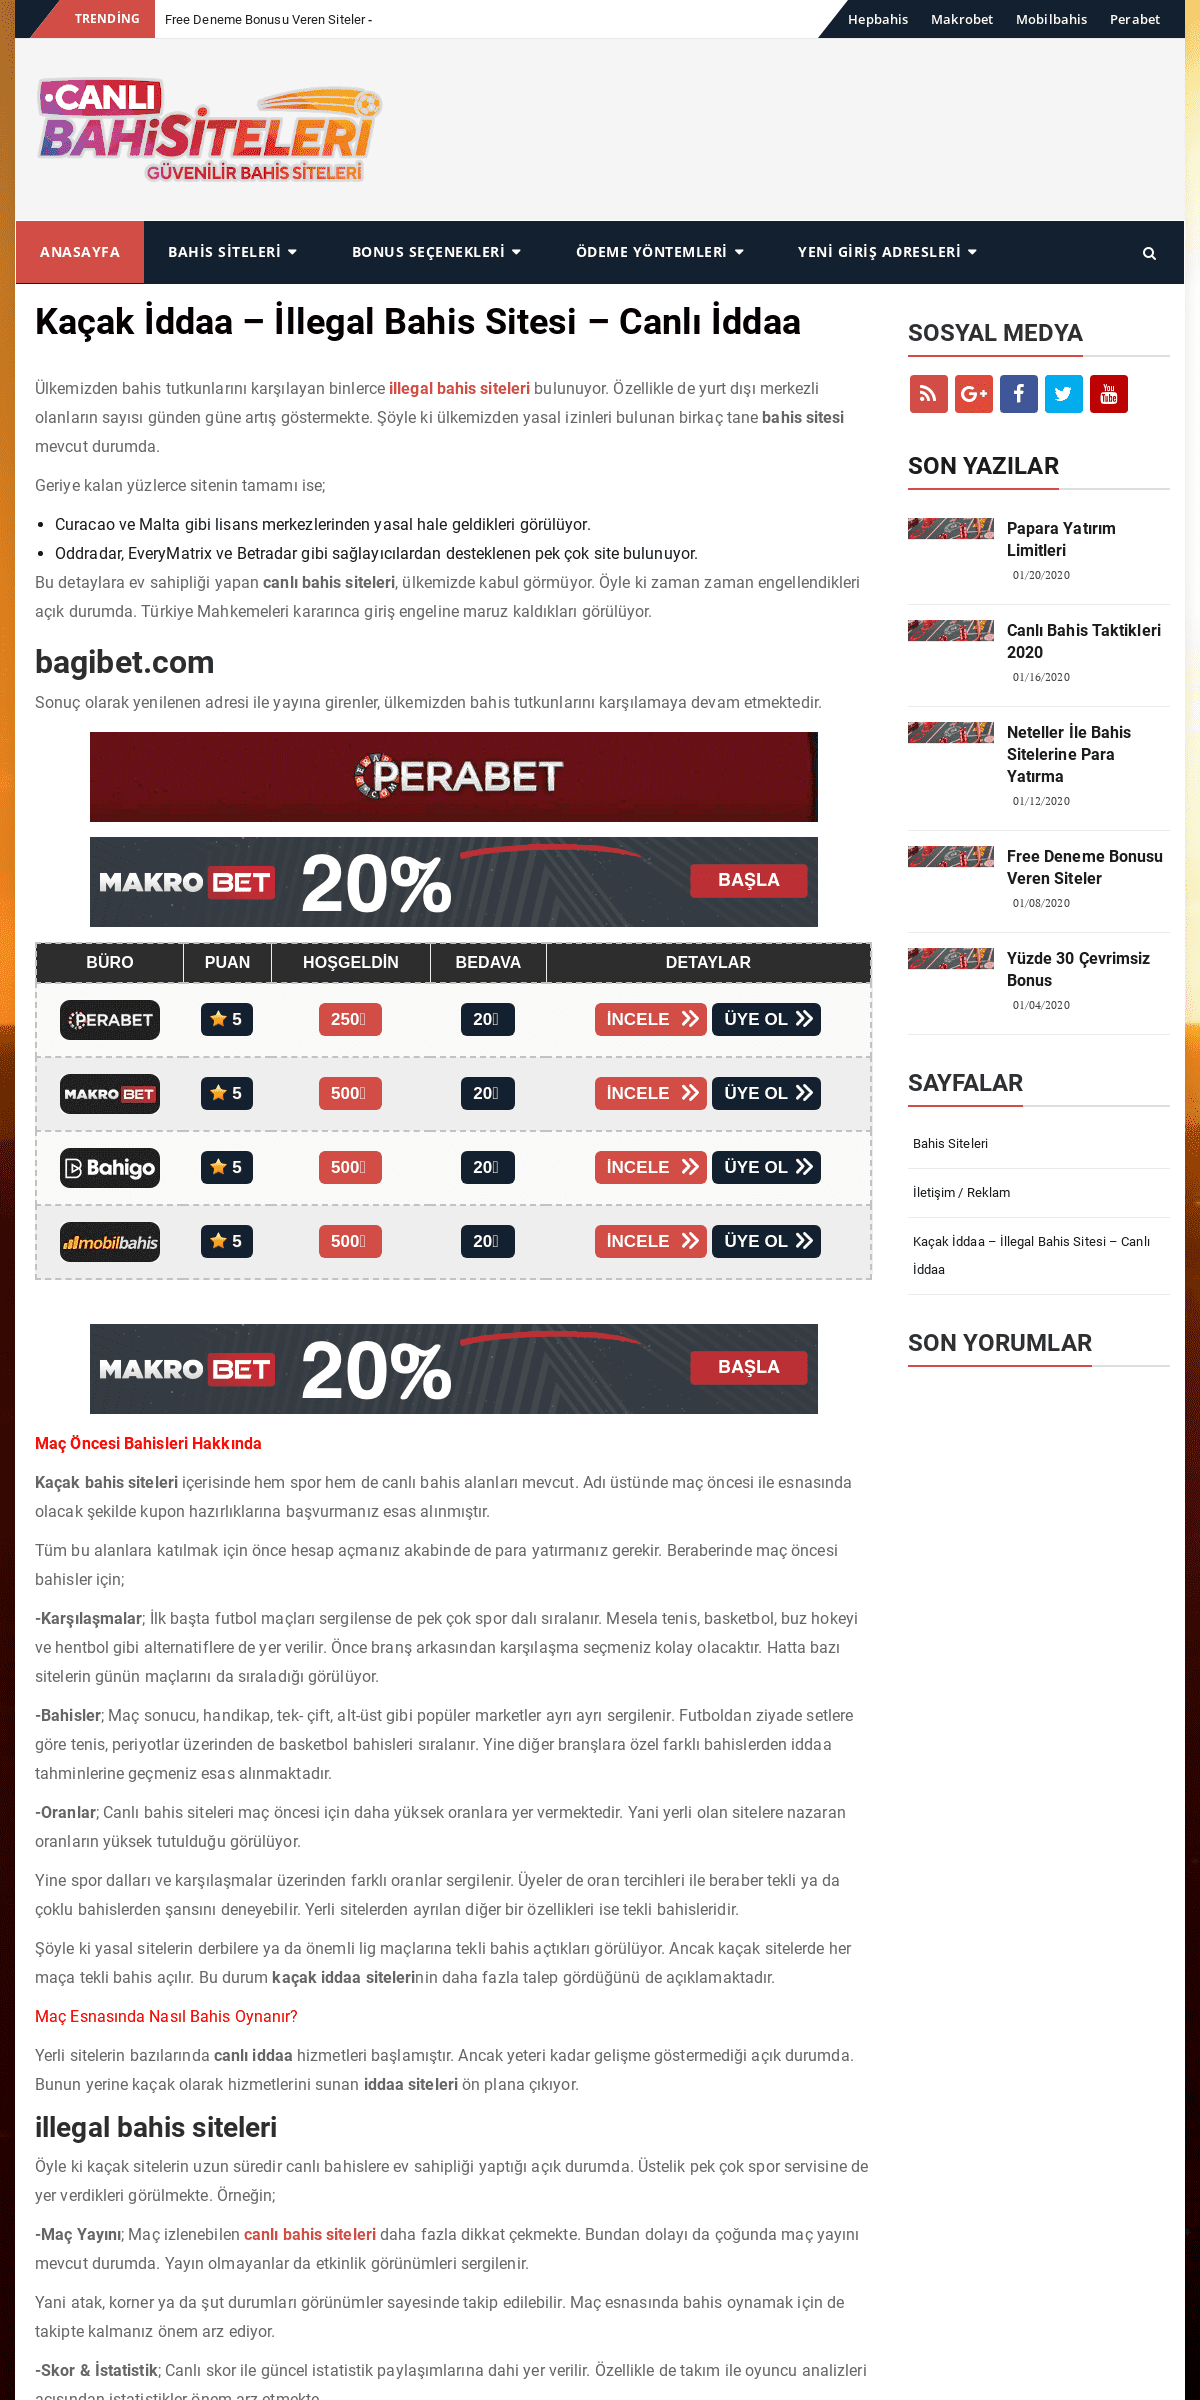 A complete backup of bagibet.com